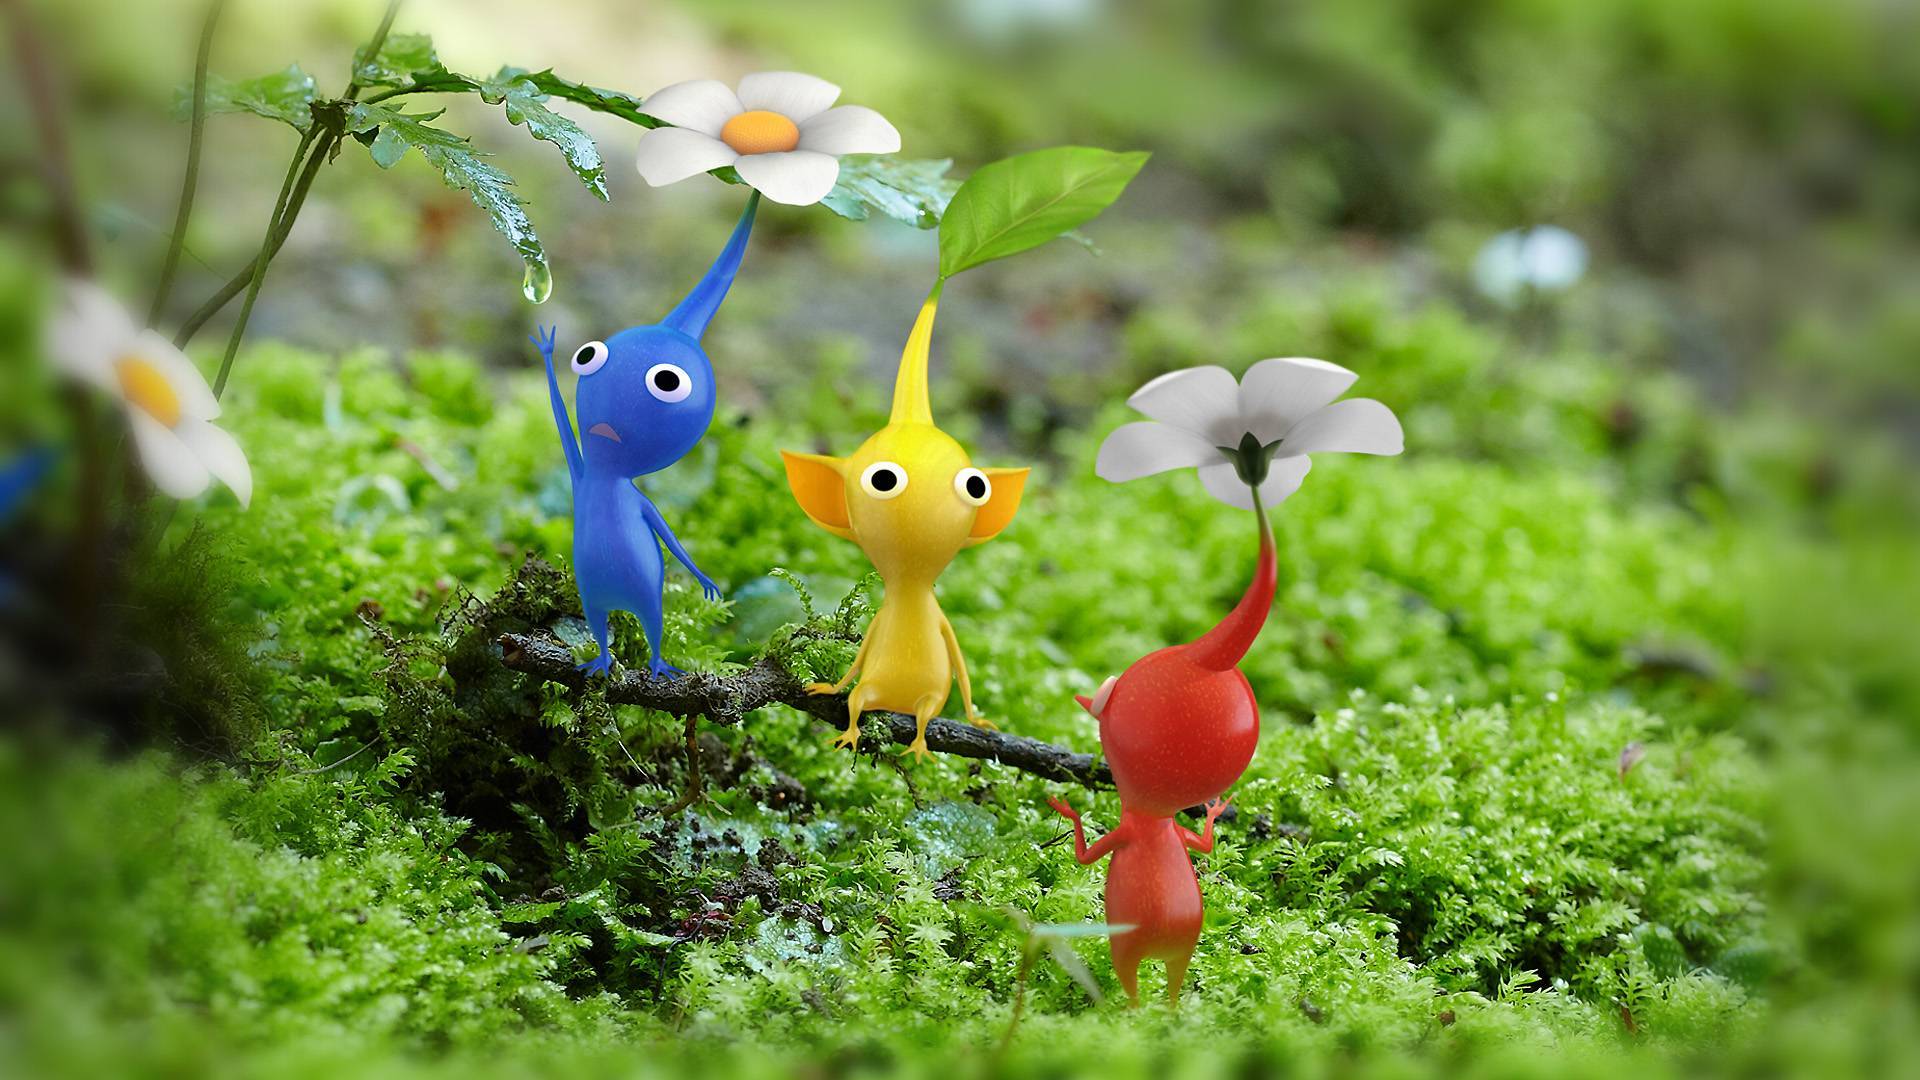 Pikmin 3 Wallpapers in HD GamingBoltcom Video Game News Reviews